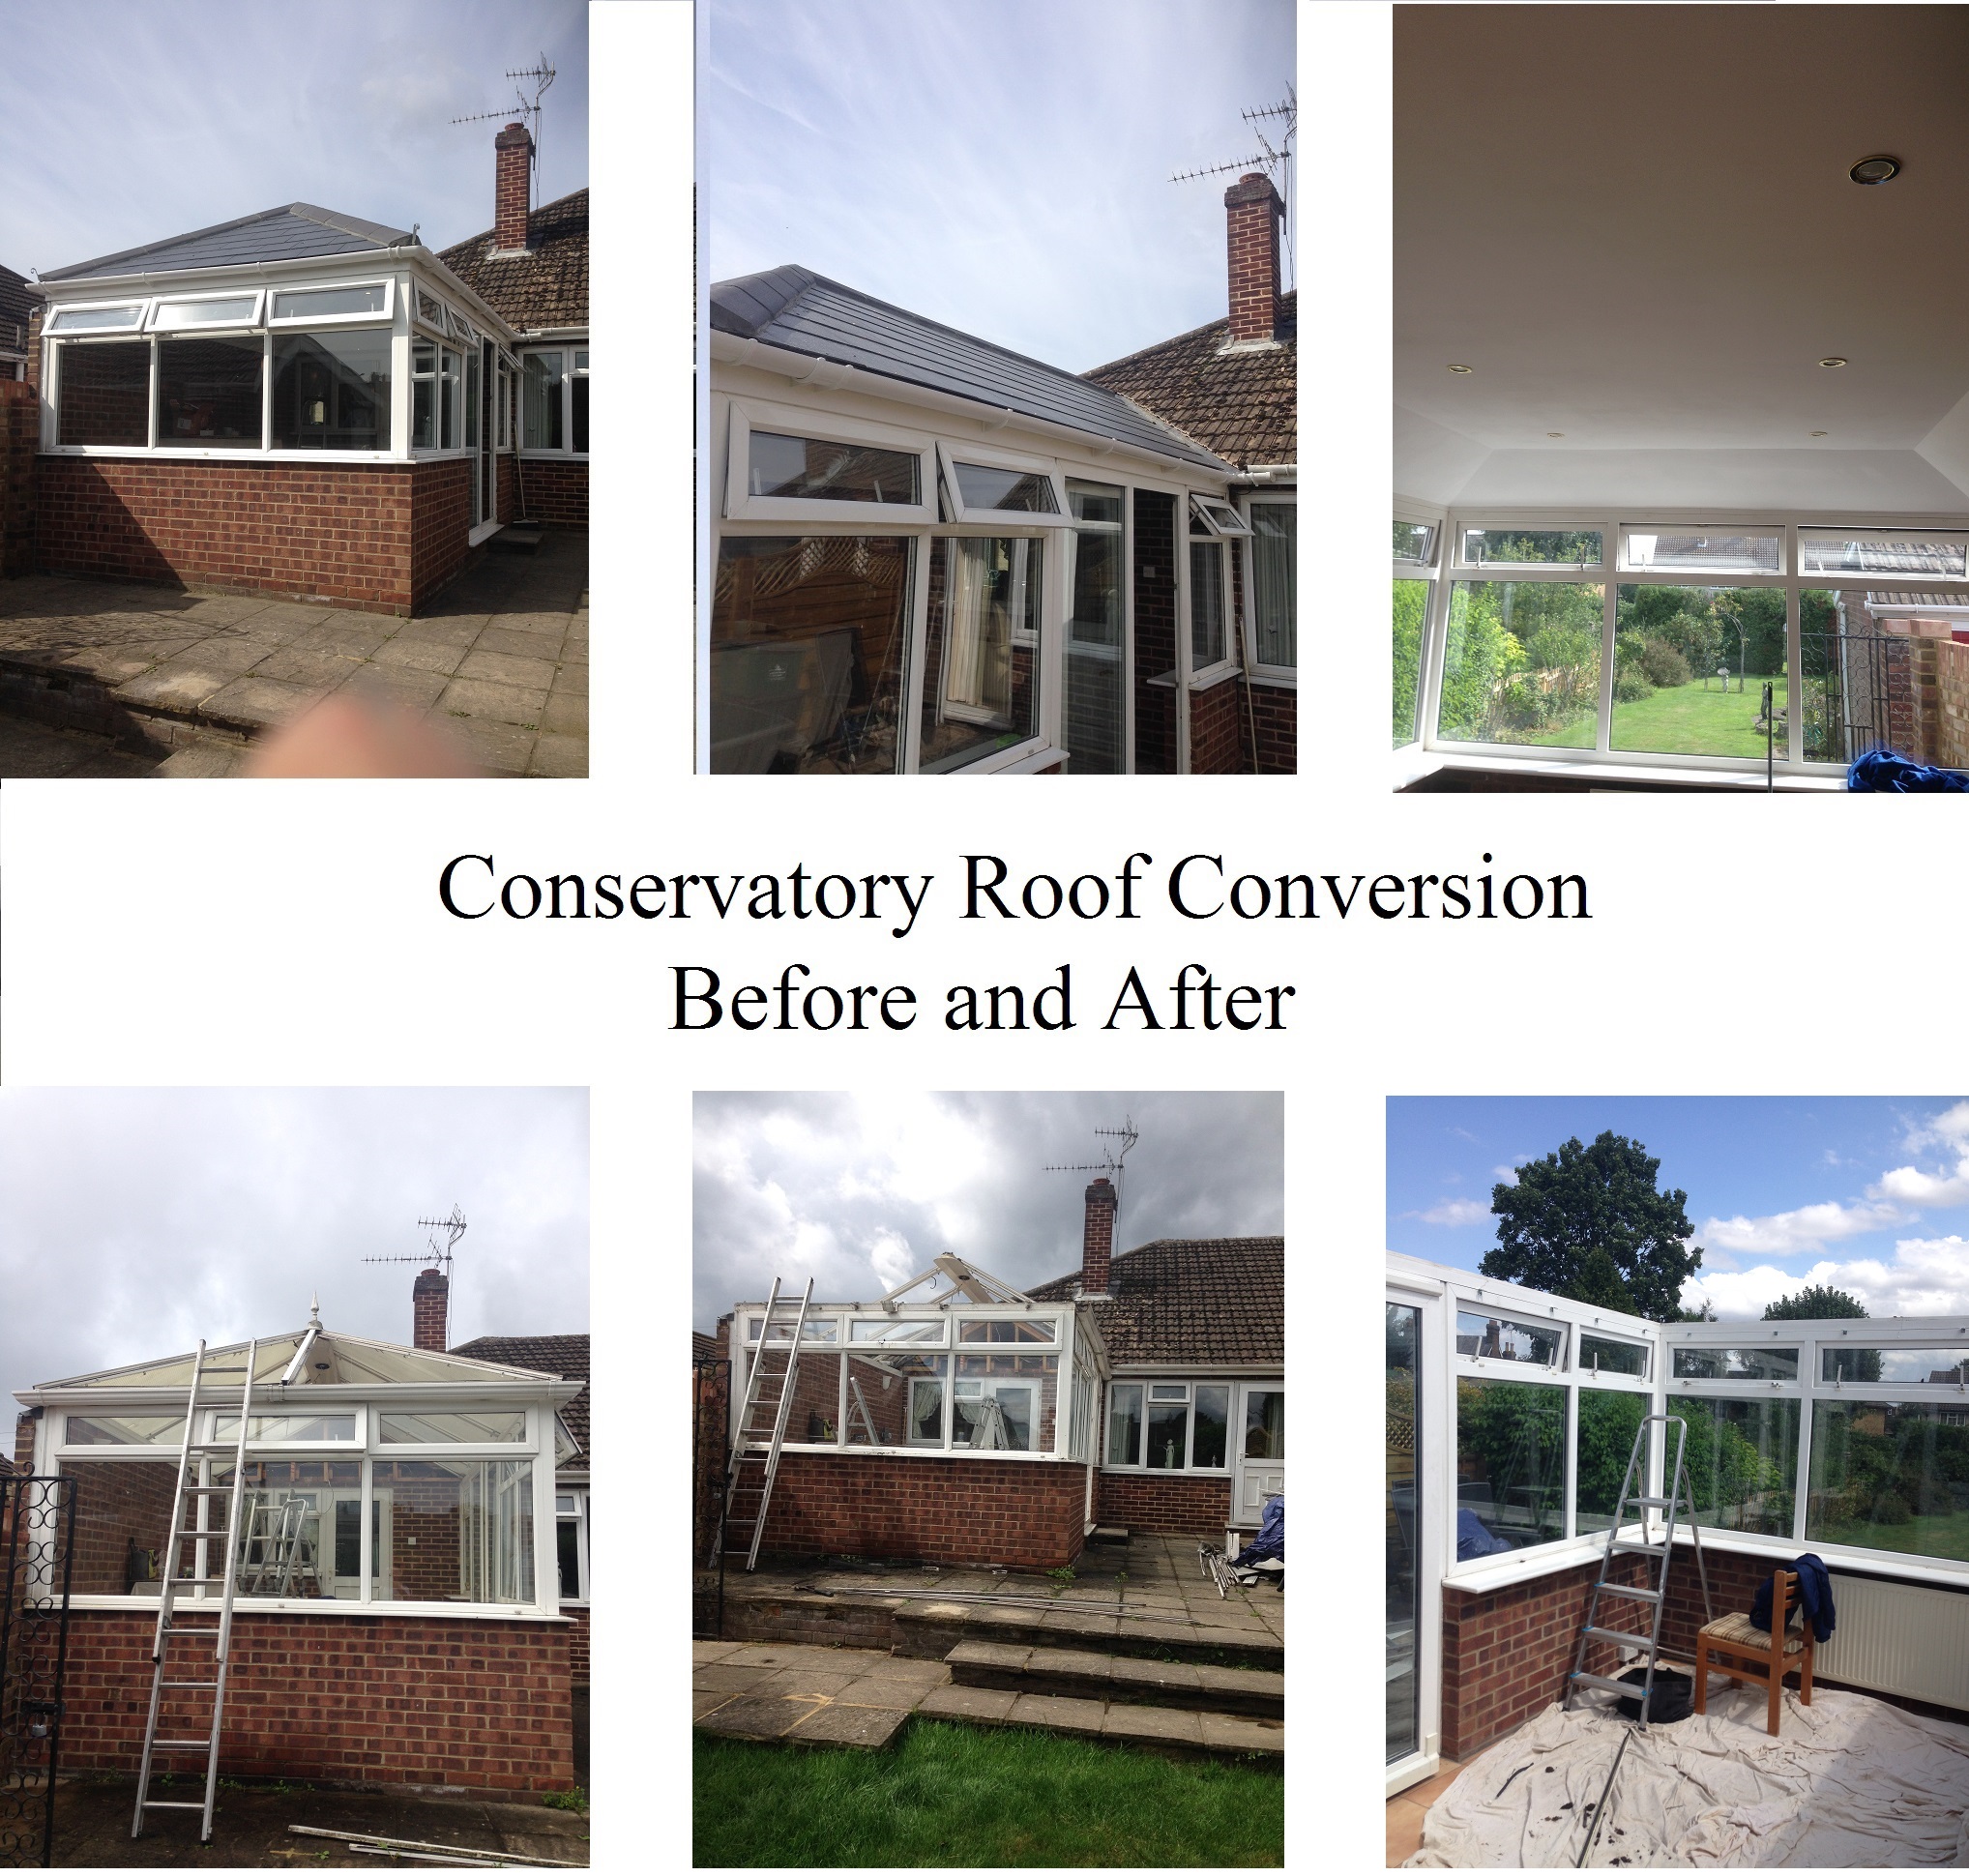 Conservatory.Roof.Conversion.jpg